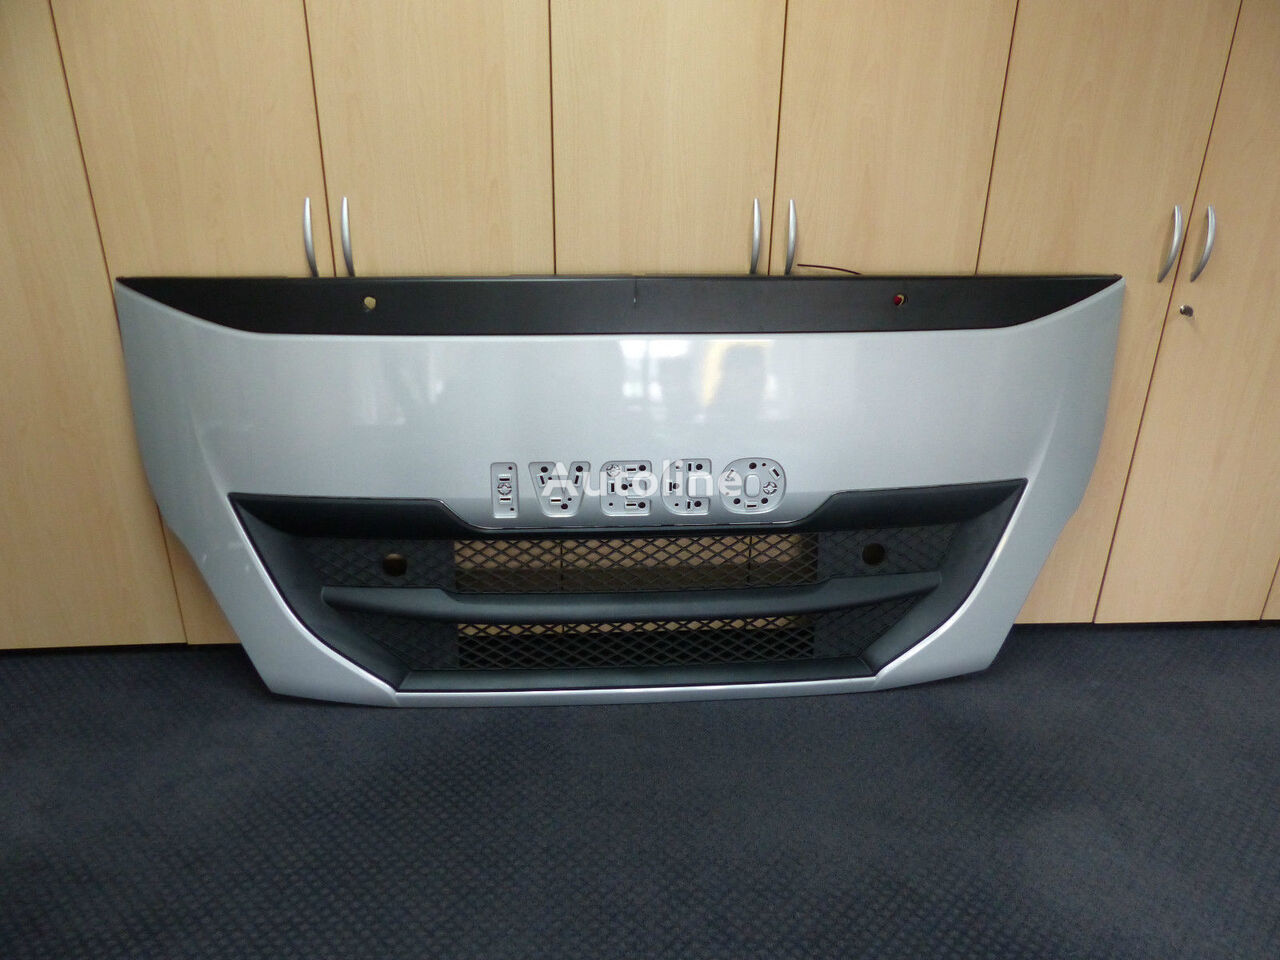 IVECO HI-WAY Frontgrill, Frontklappe - Neuwertig 5801546913 radiator grille for IVECO Stralis truck tractor